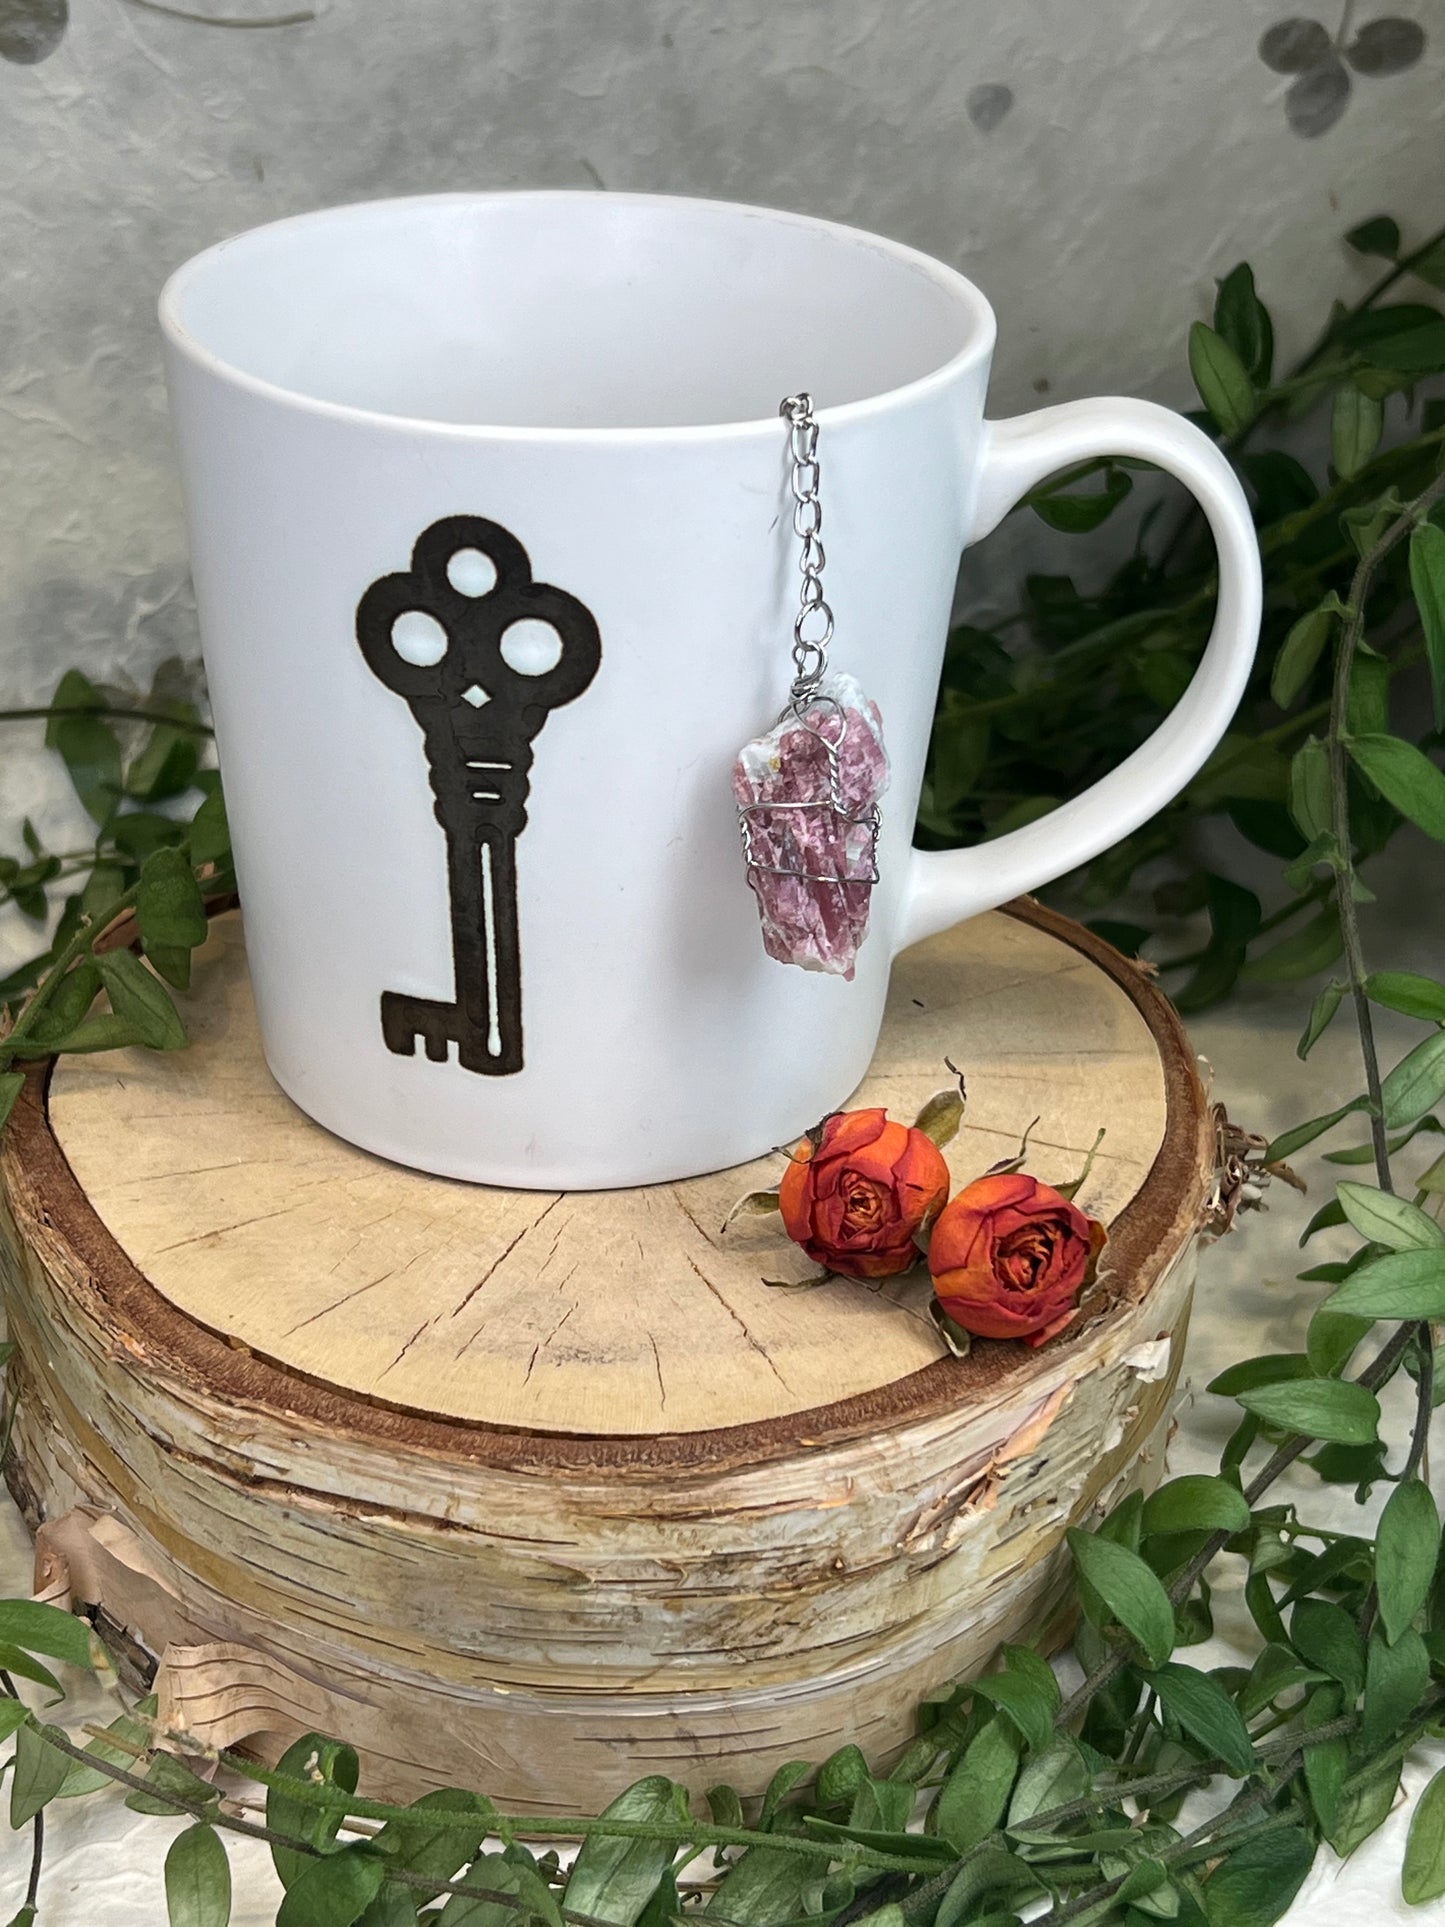 Crystal Wrapped Tea Infuser